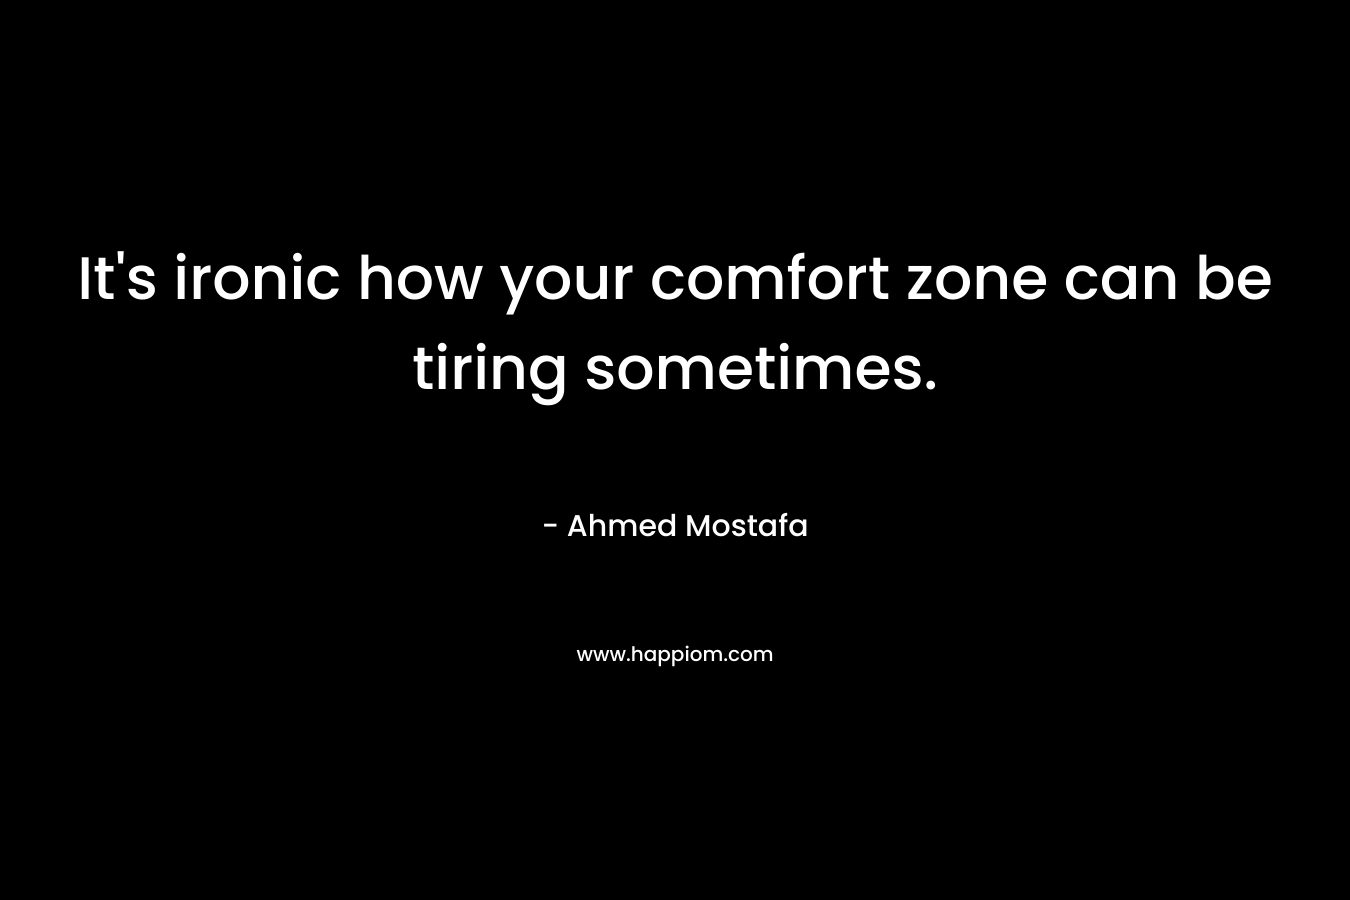 It’s ironic how your comfort zone can be tiring sometimes. – Ahmed Mostafa